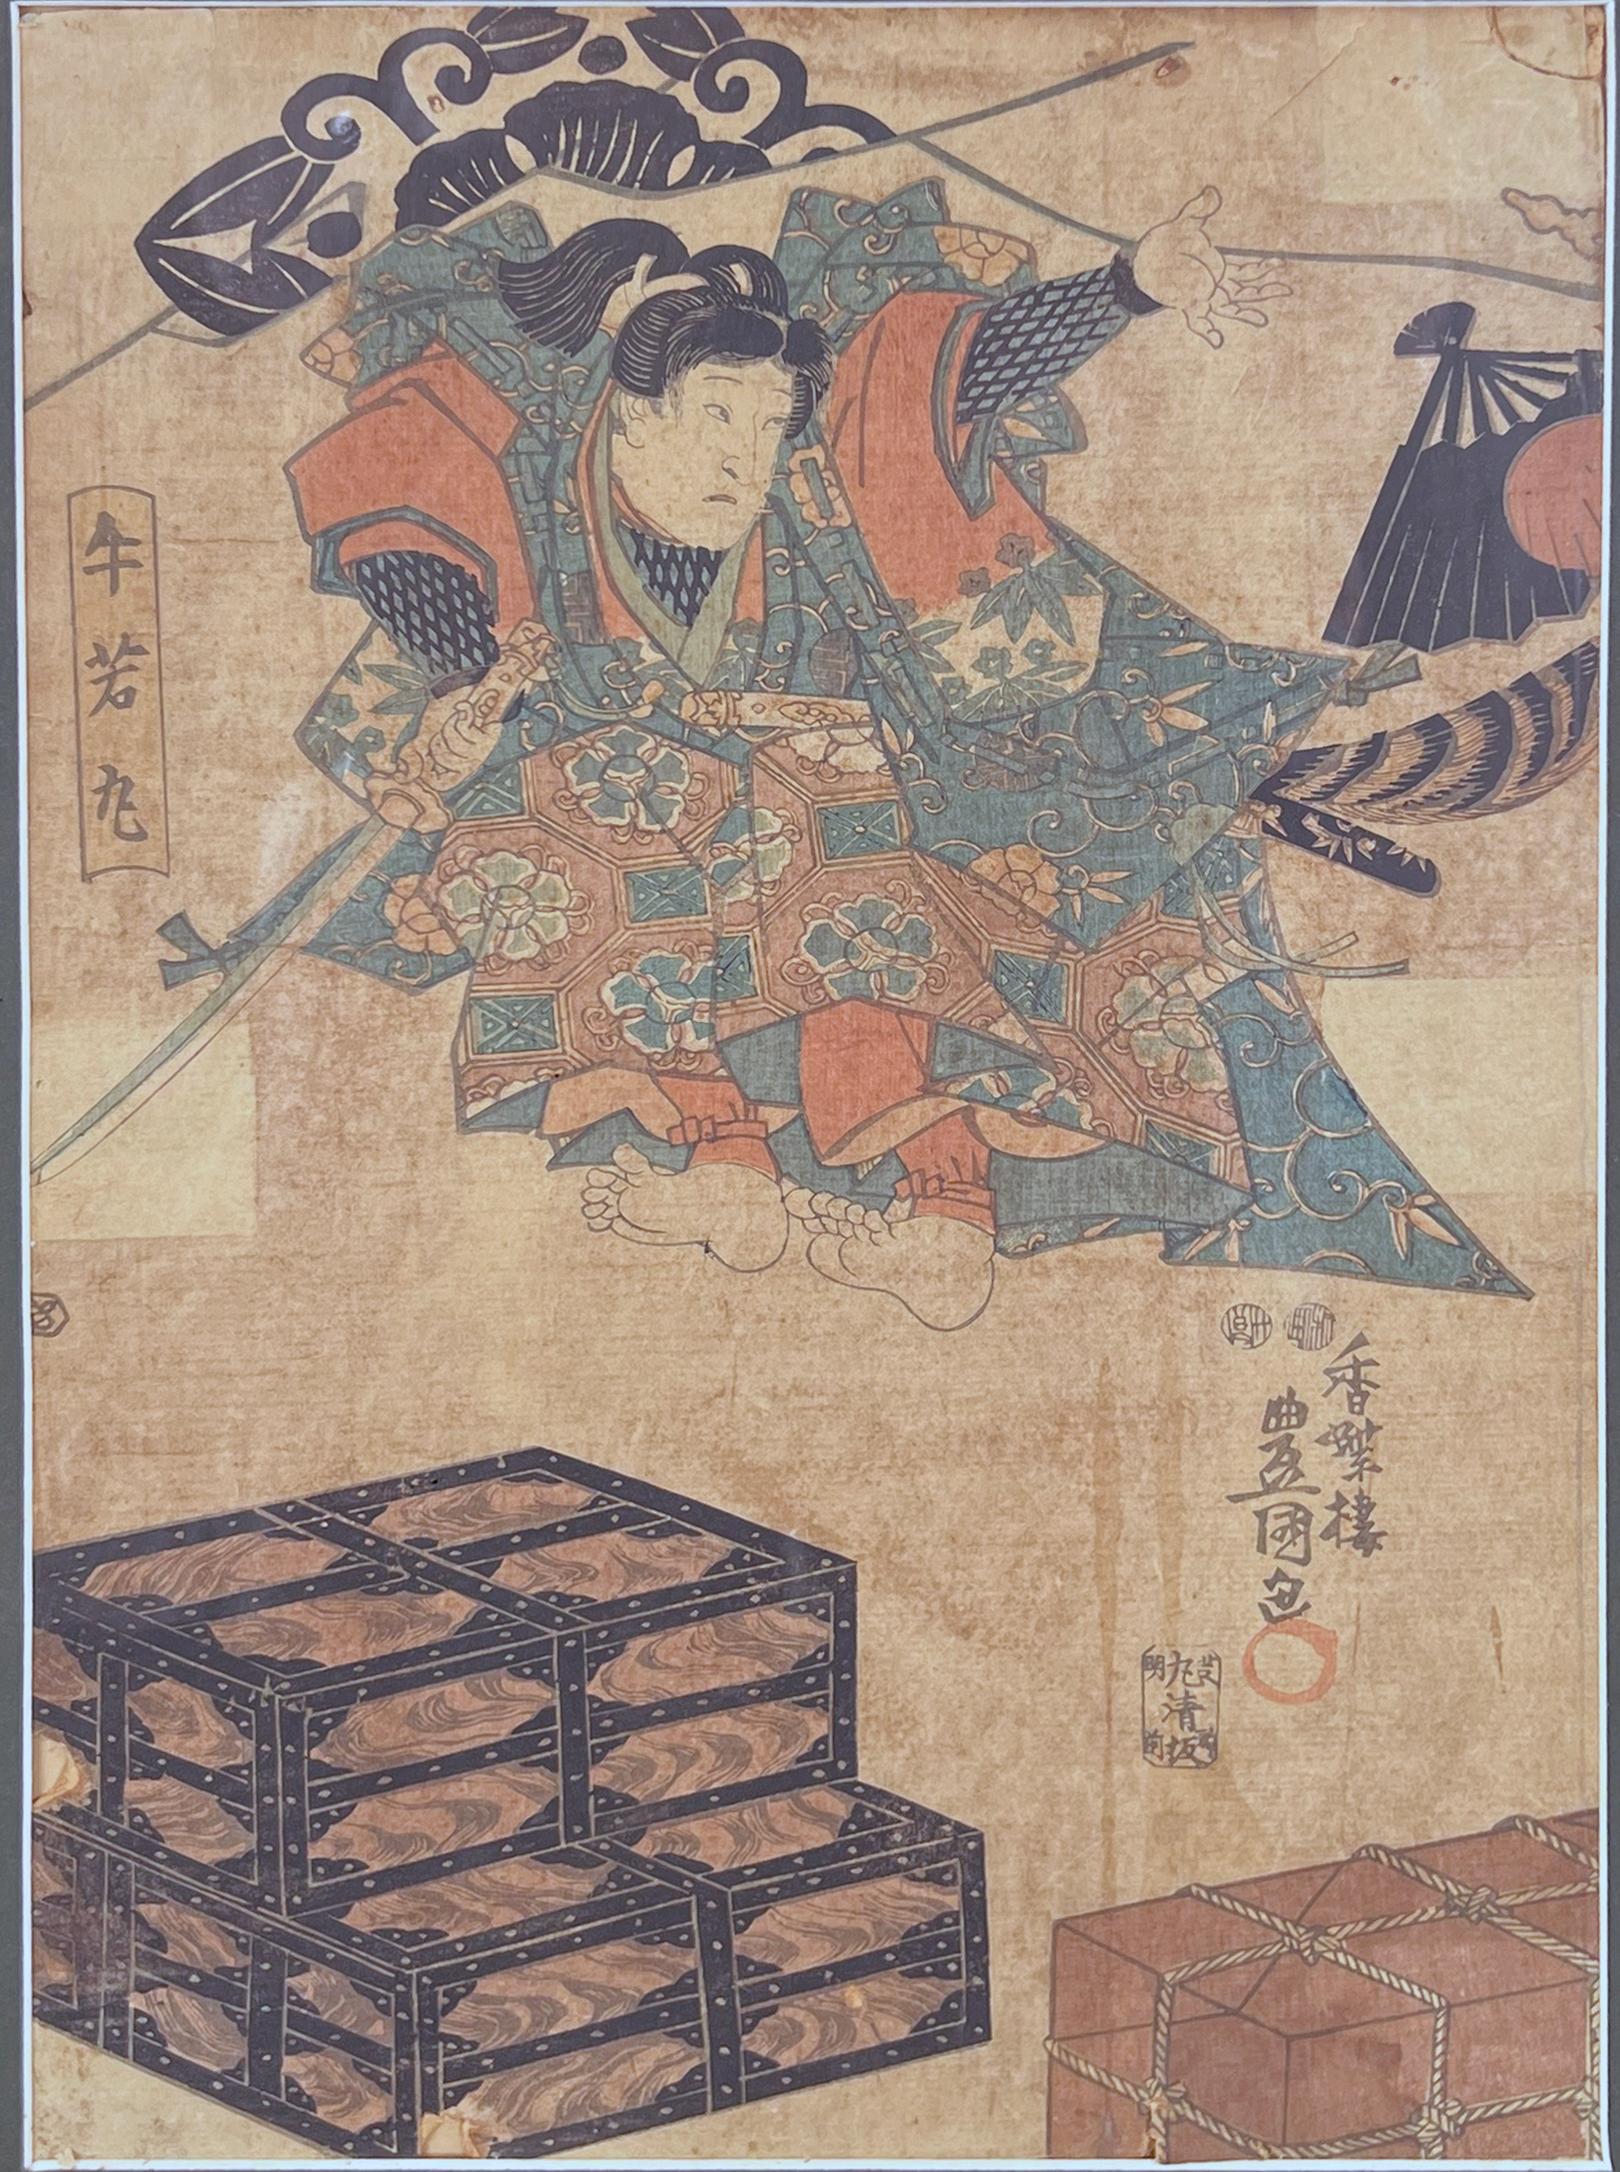 Kumasaka Chōhan to Ushiwakamaru is a Japanese Ukiyo-e print created between 1848 and 1854 by artist Utagawa Kunisada (Japanese, 1786-1864). The print is a Diptych, and is part of the Library of Congress's Japanese prints and drawings collection.